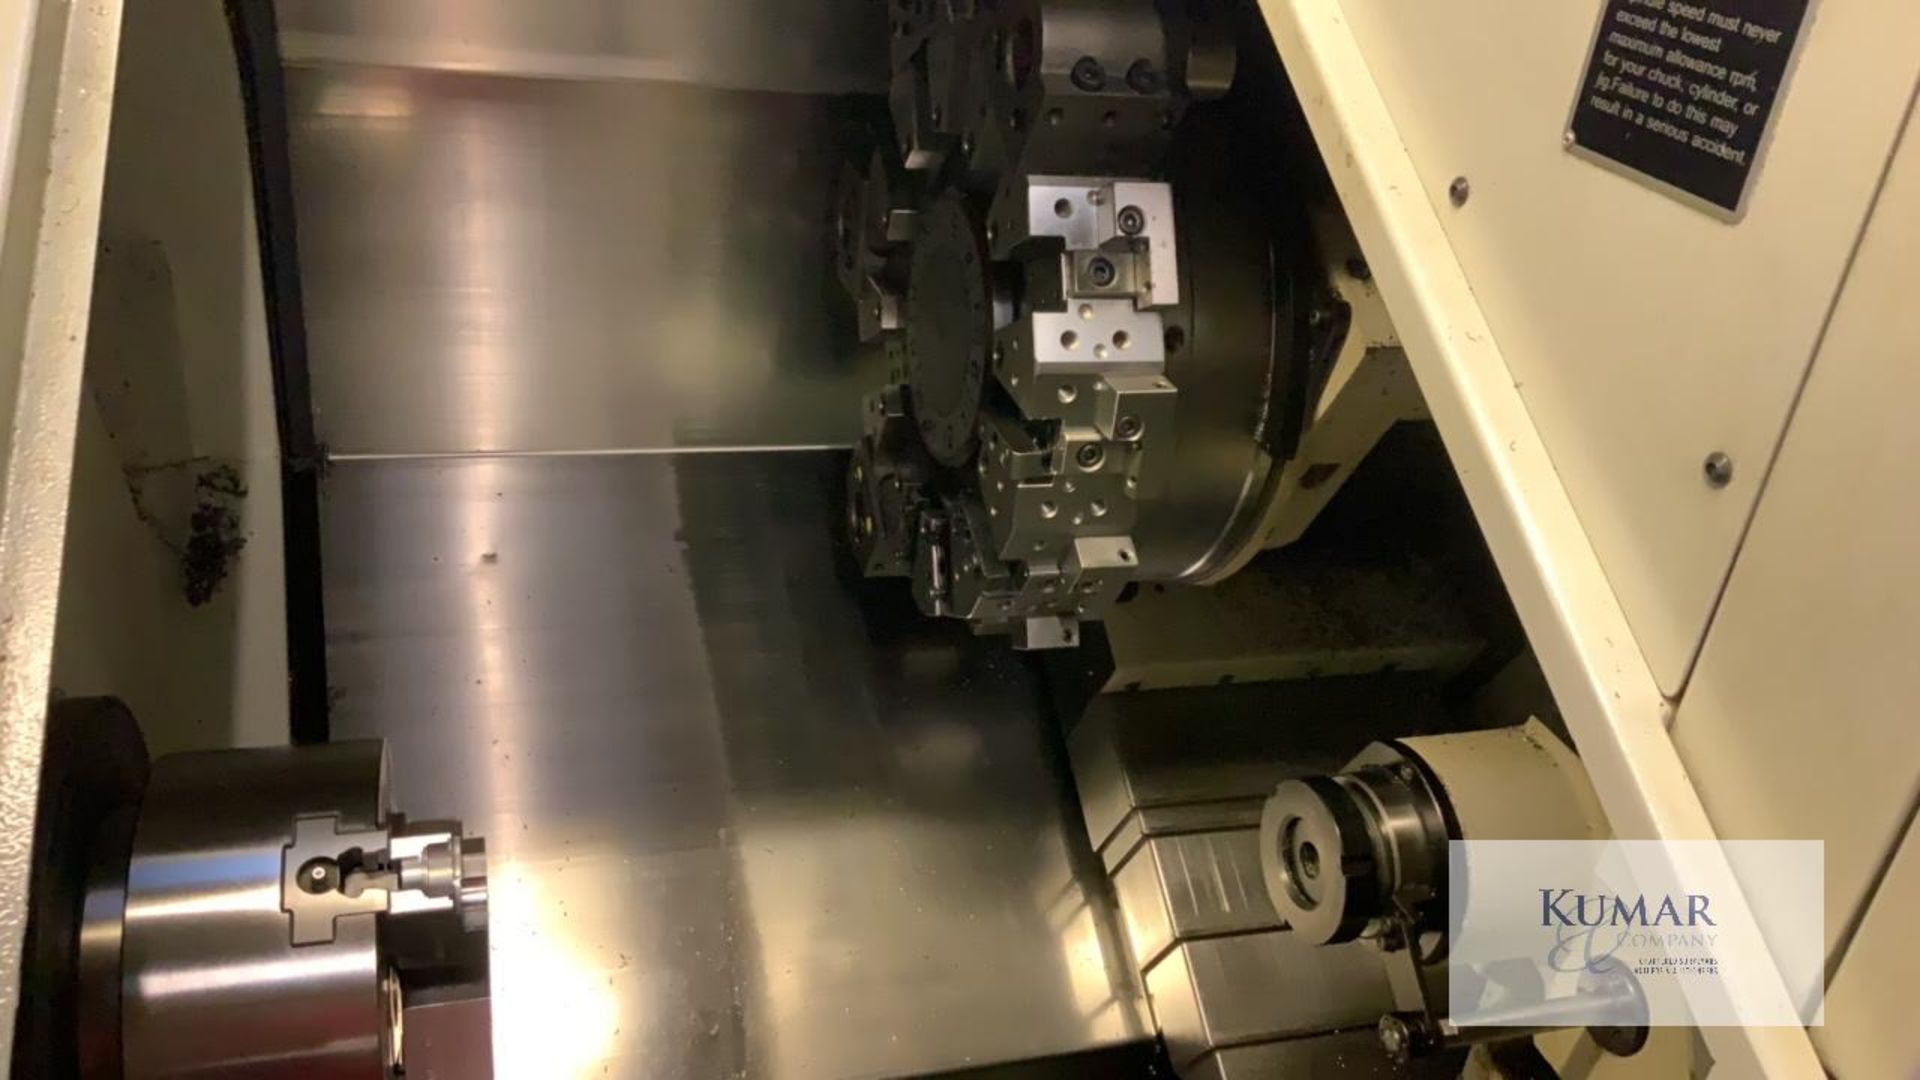 CMZ Model TB 67 CNC Slant Bed Lathe, Serial No TB497 (2013) including tooling and attachments as - Image 14 of 15